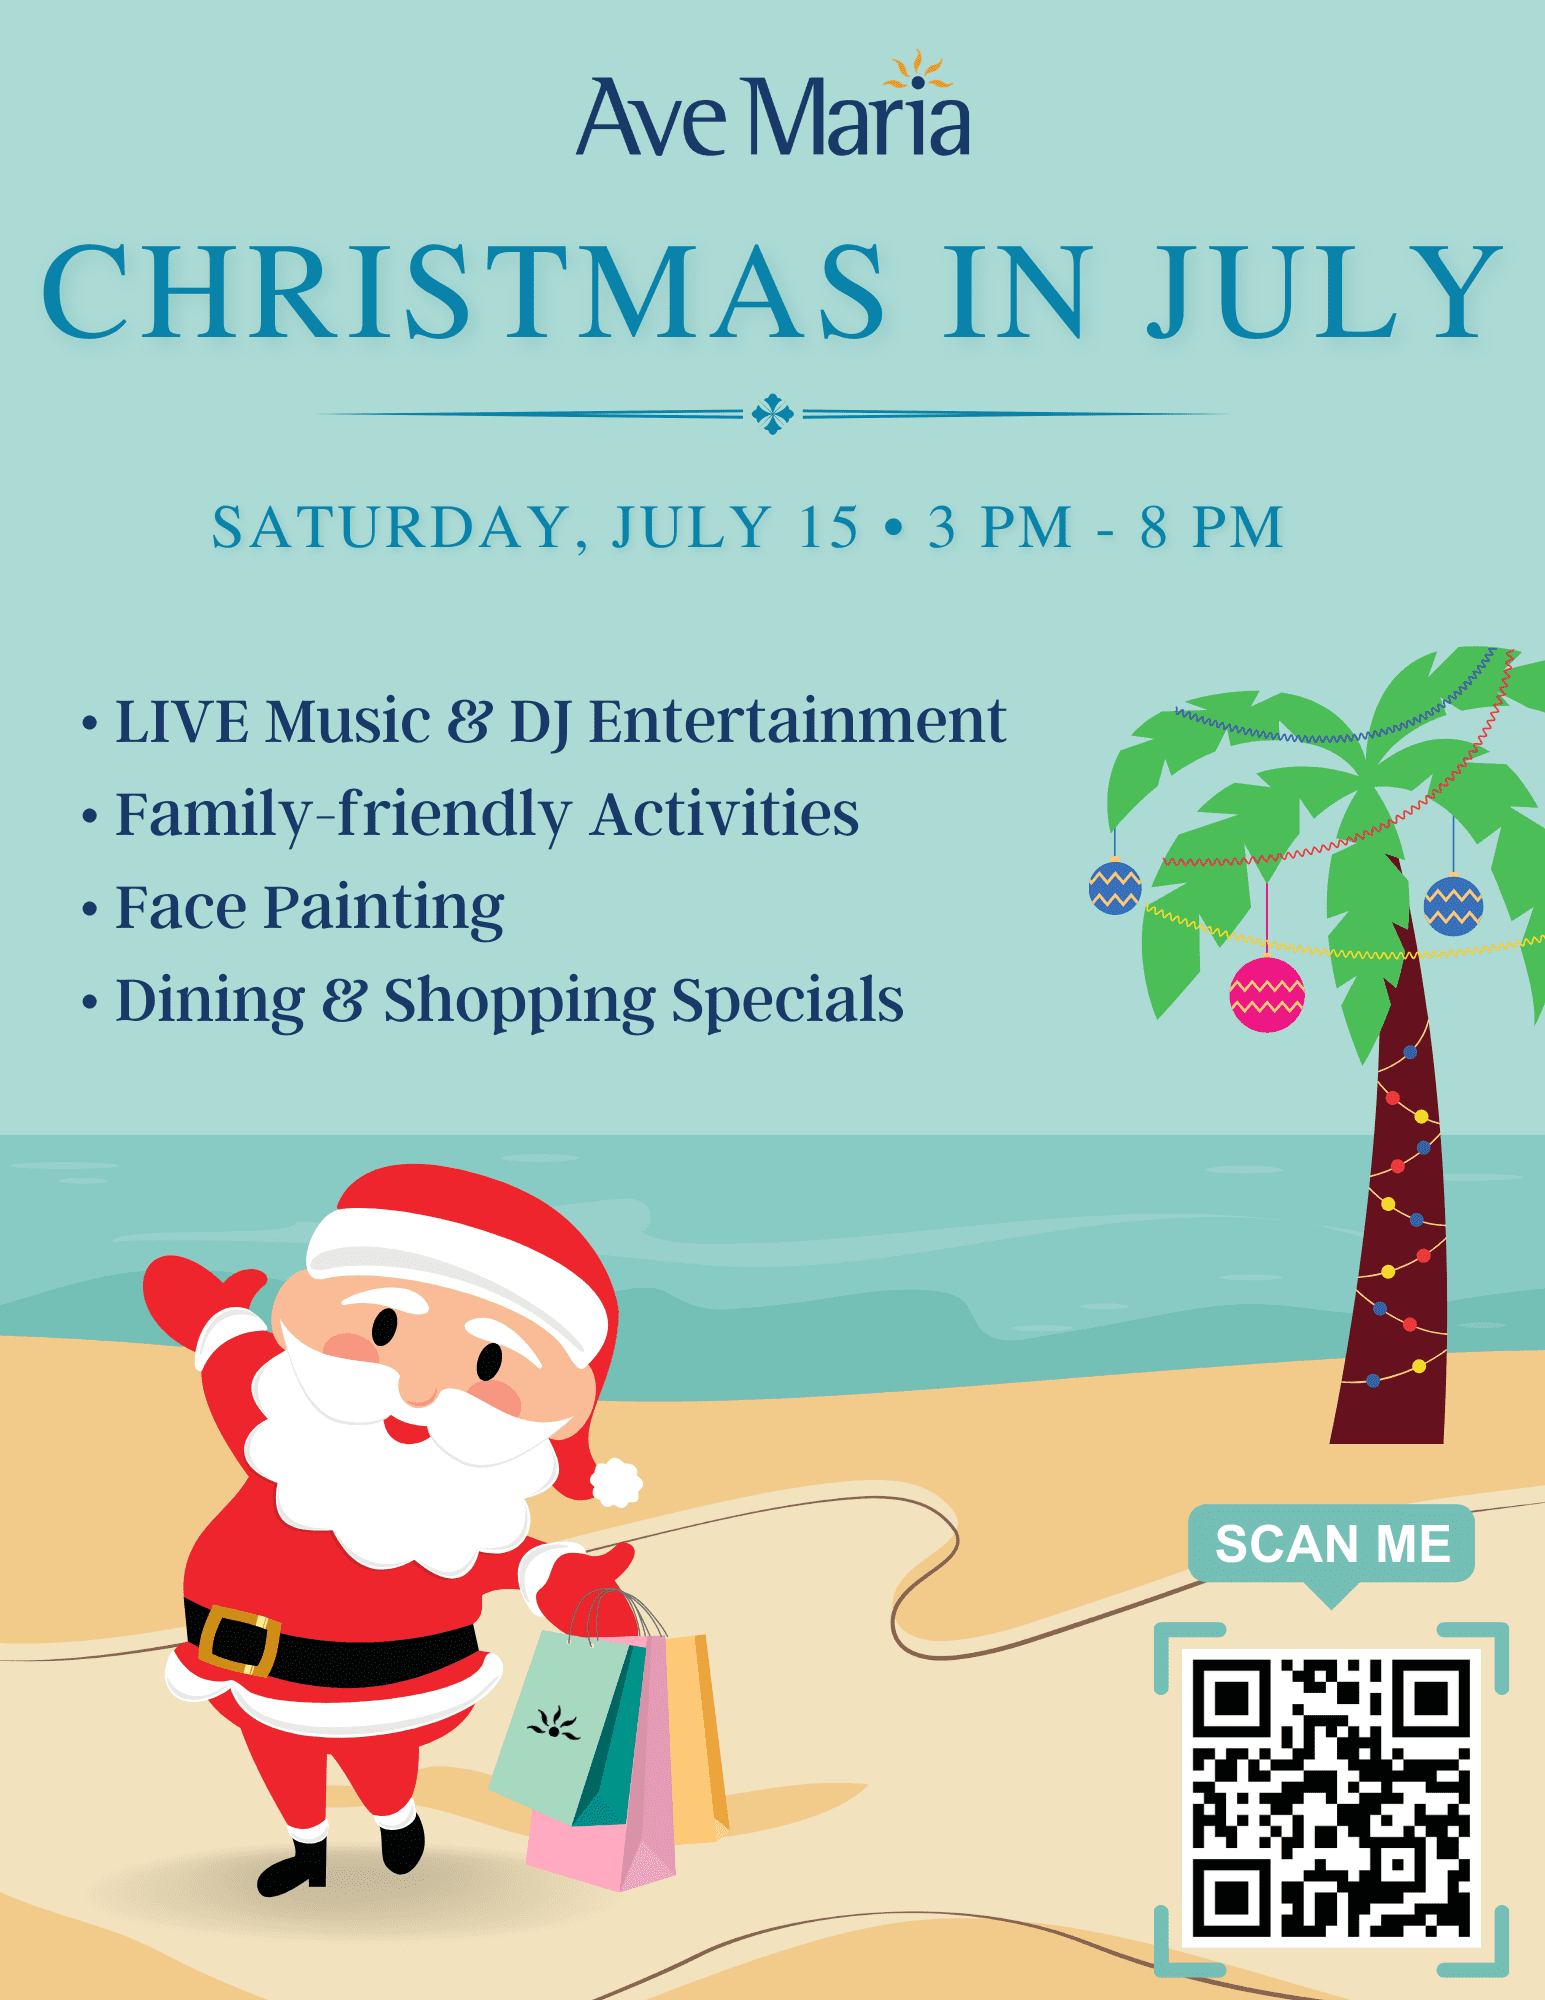 Ave Maria 2023 Christmas in July Flyer